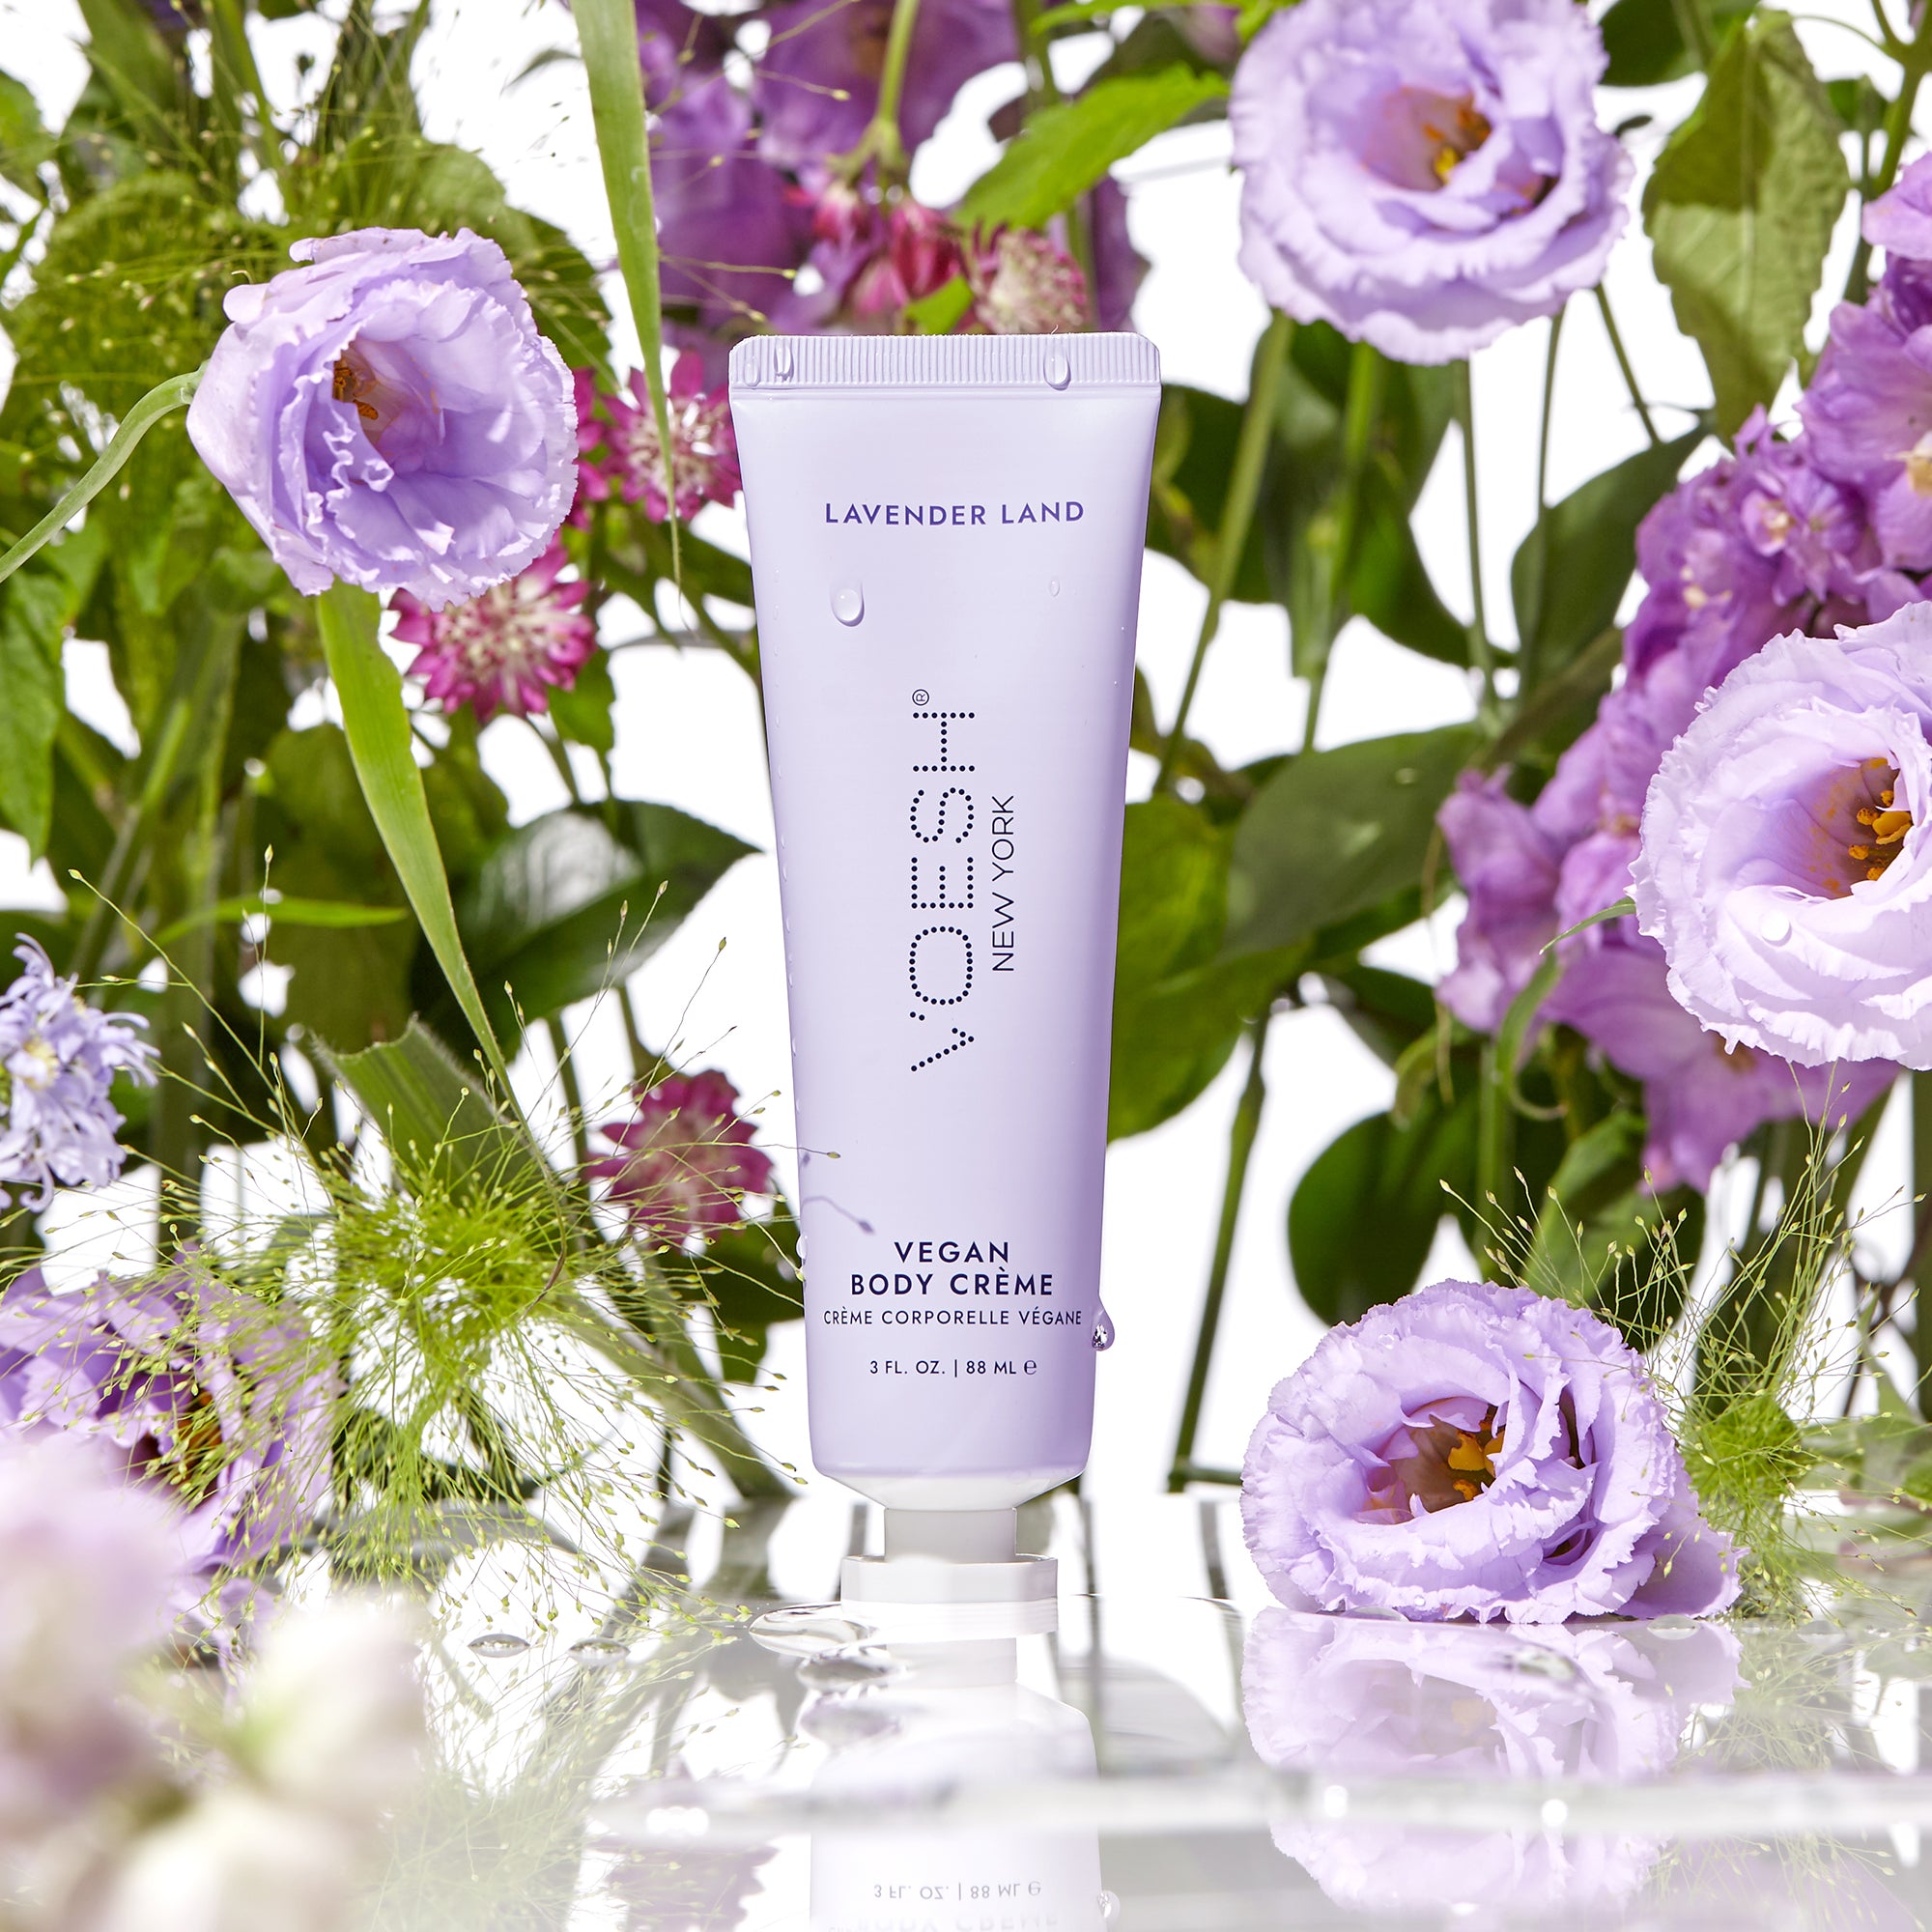 Vegan Body Crème Lavender Land in front of purple flowers and green leaves.